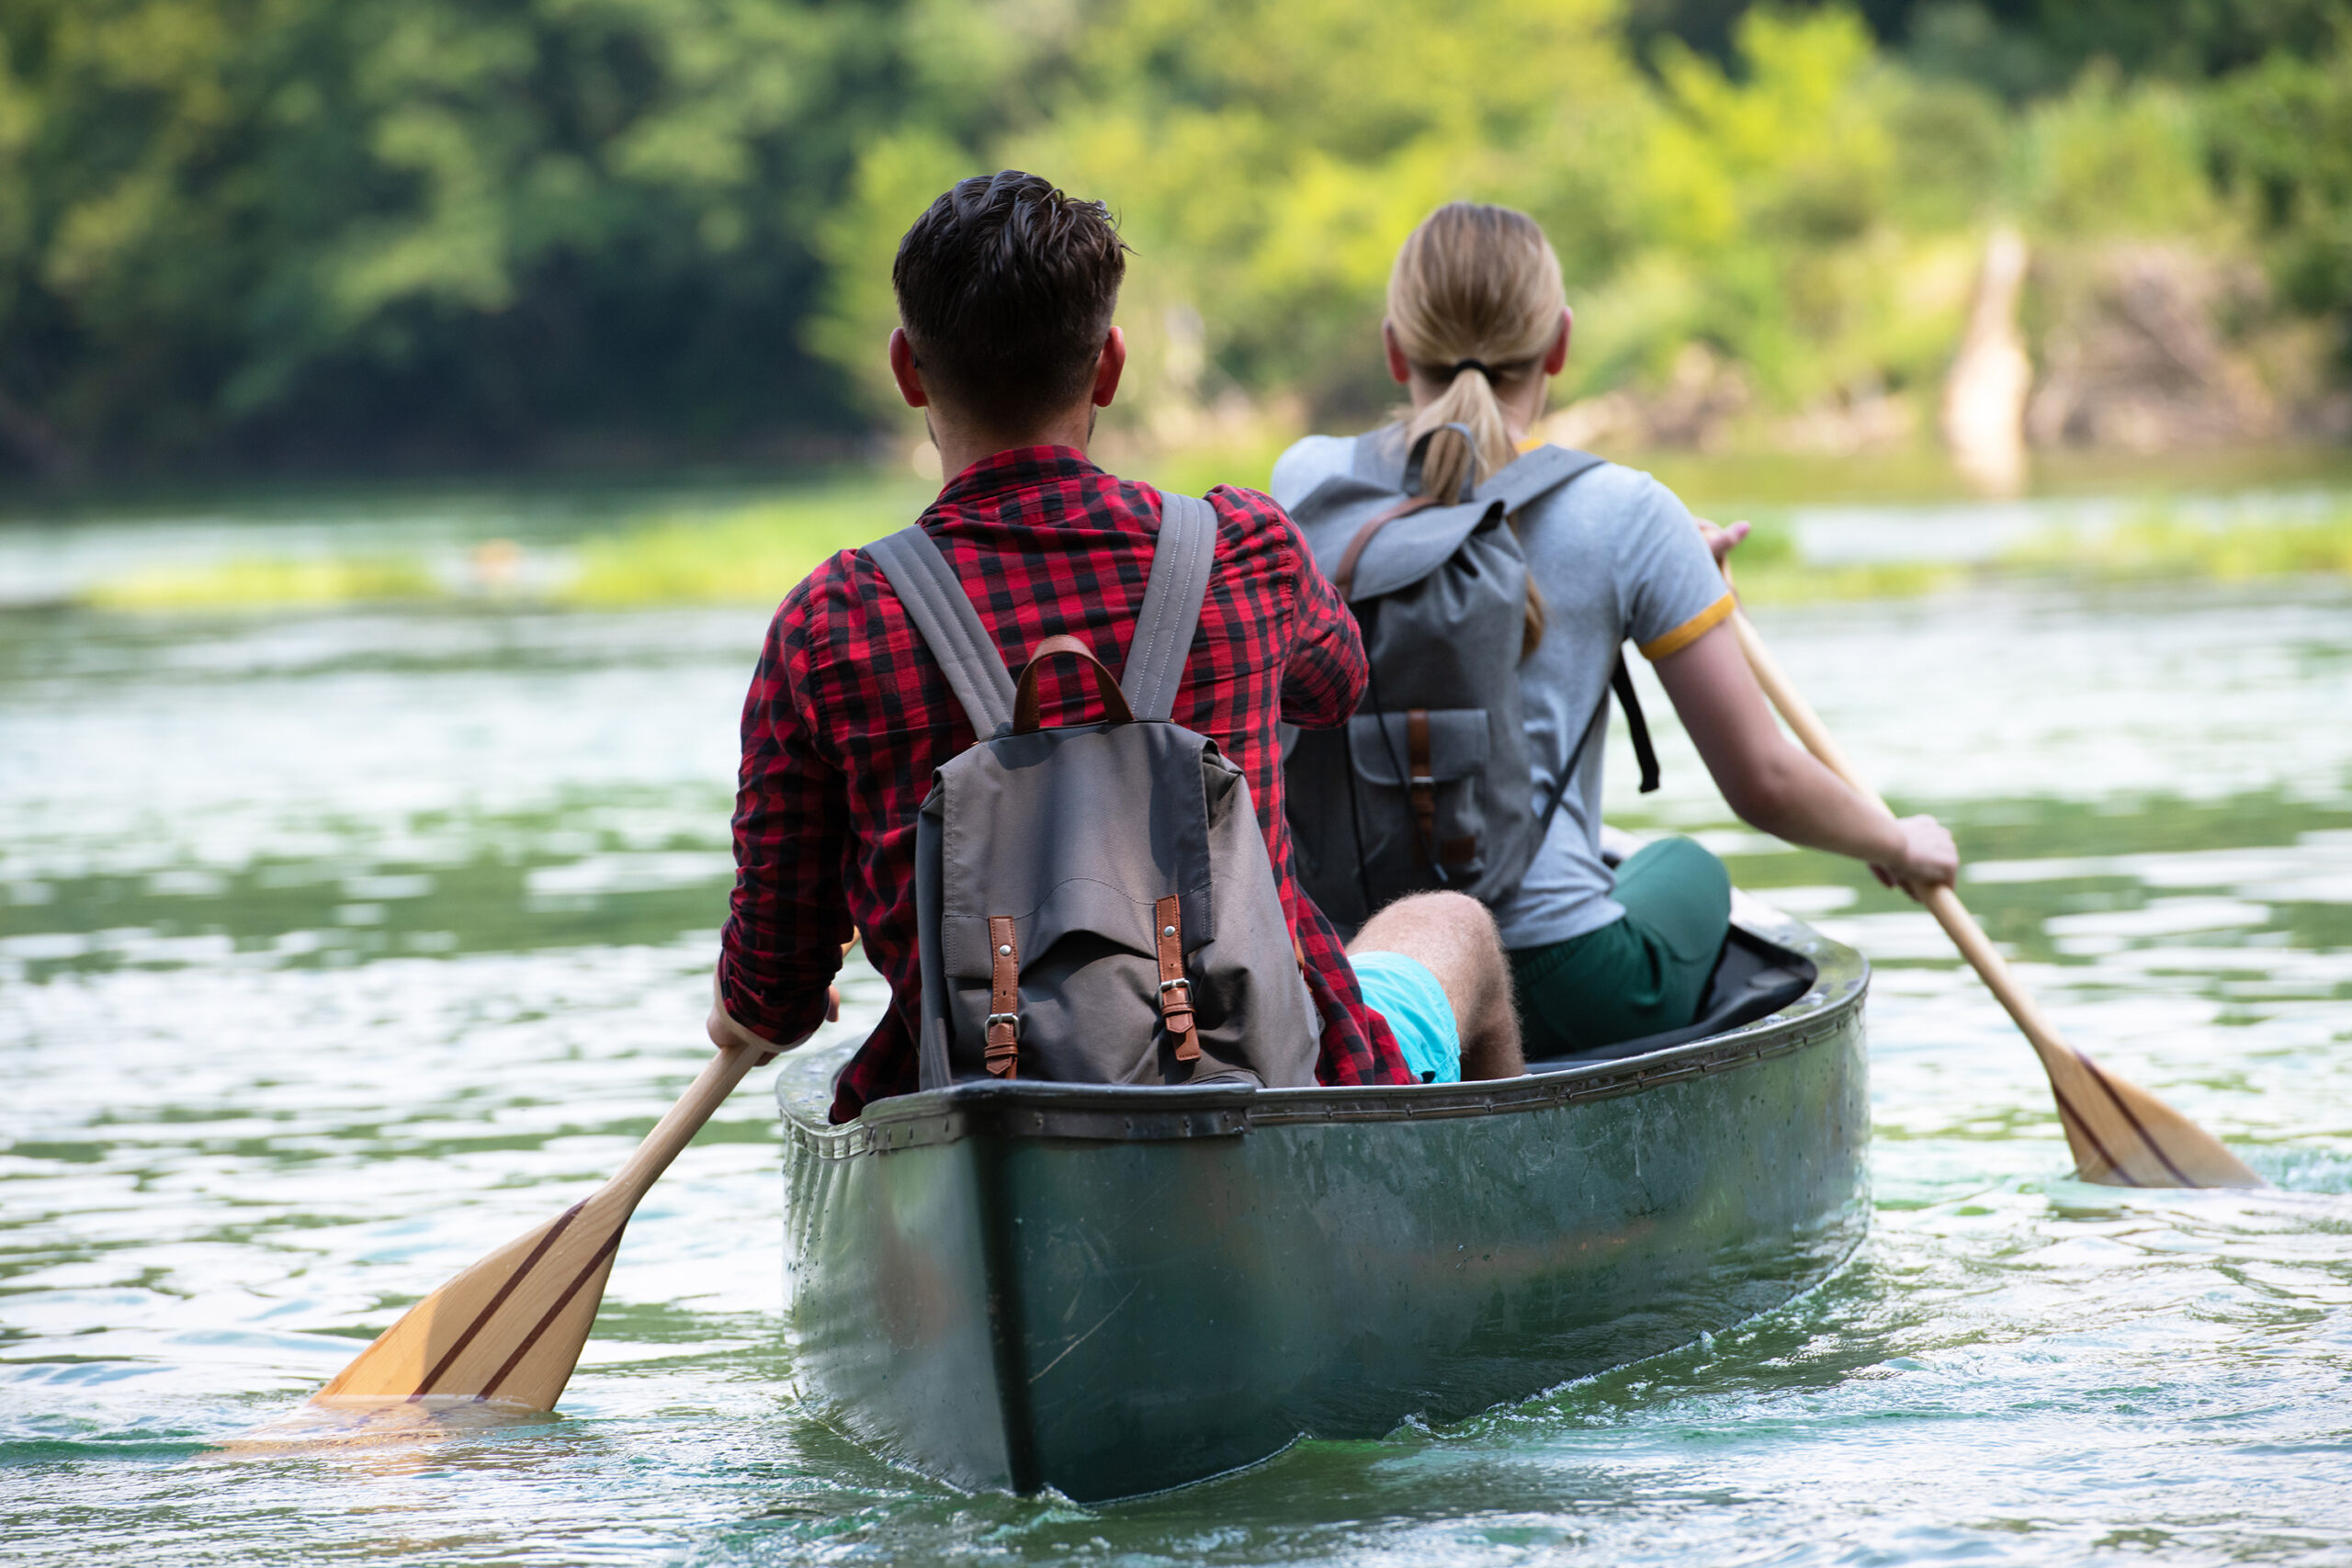 A shot from behind of a man and woman canoeing together on a river